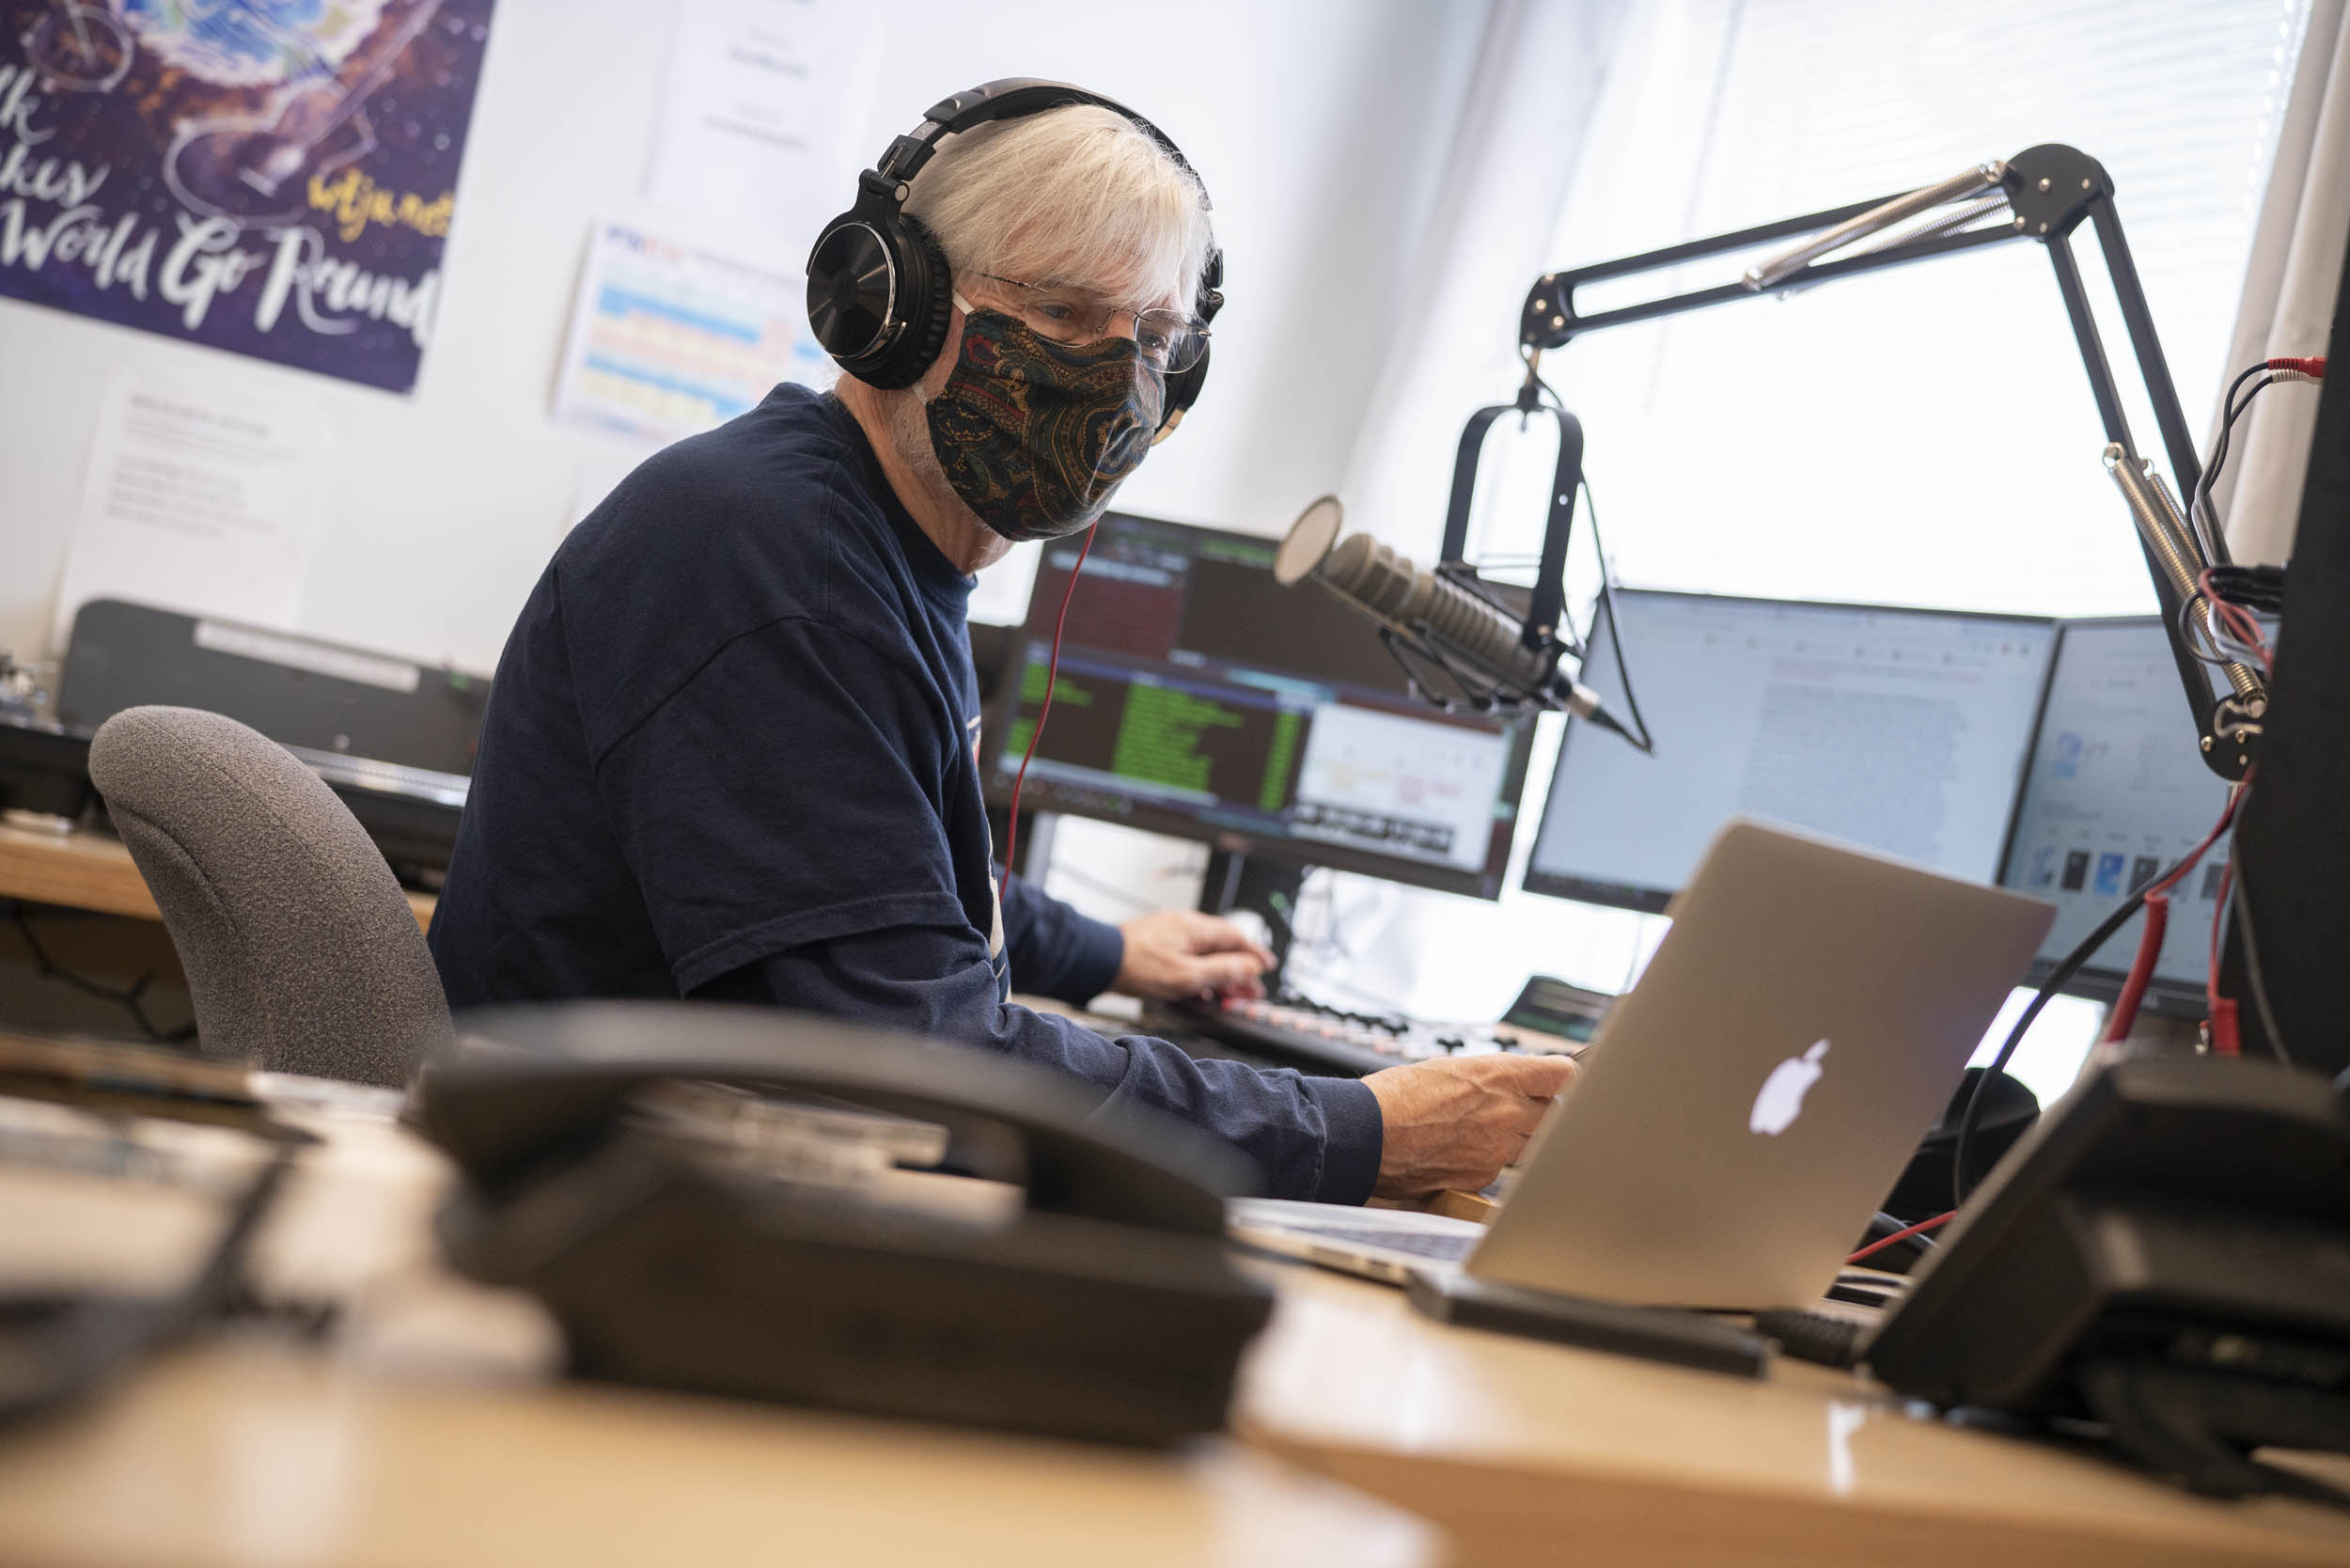 Person sitting at a desk looking at a laptop while running a radio show